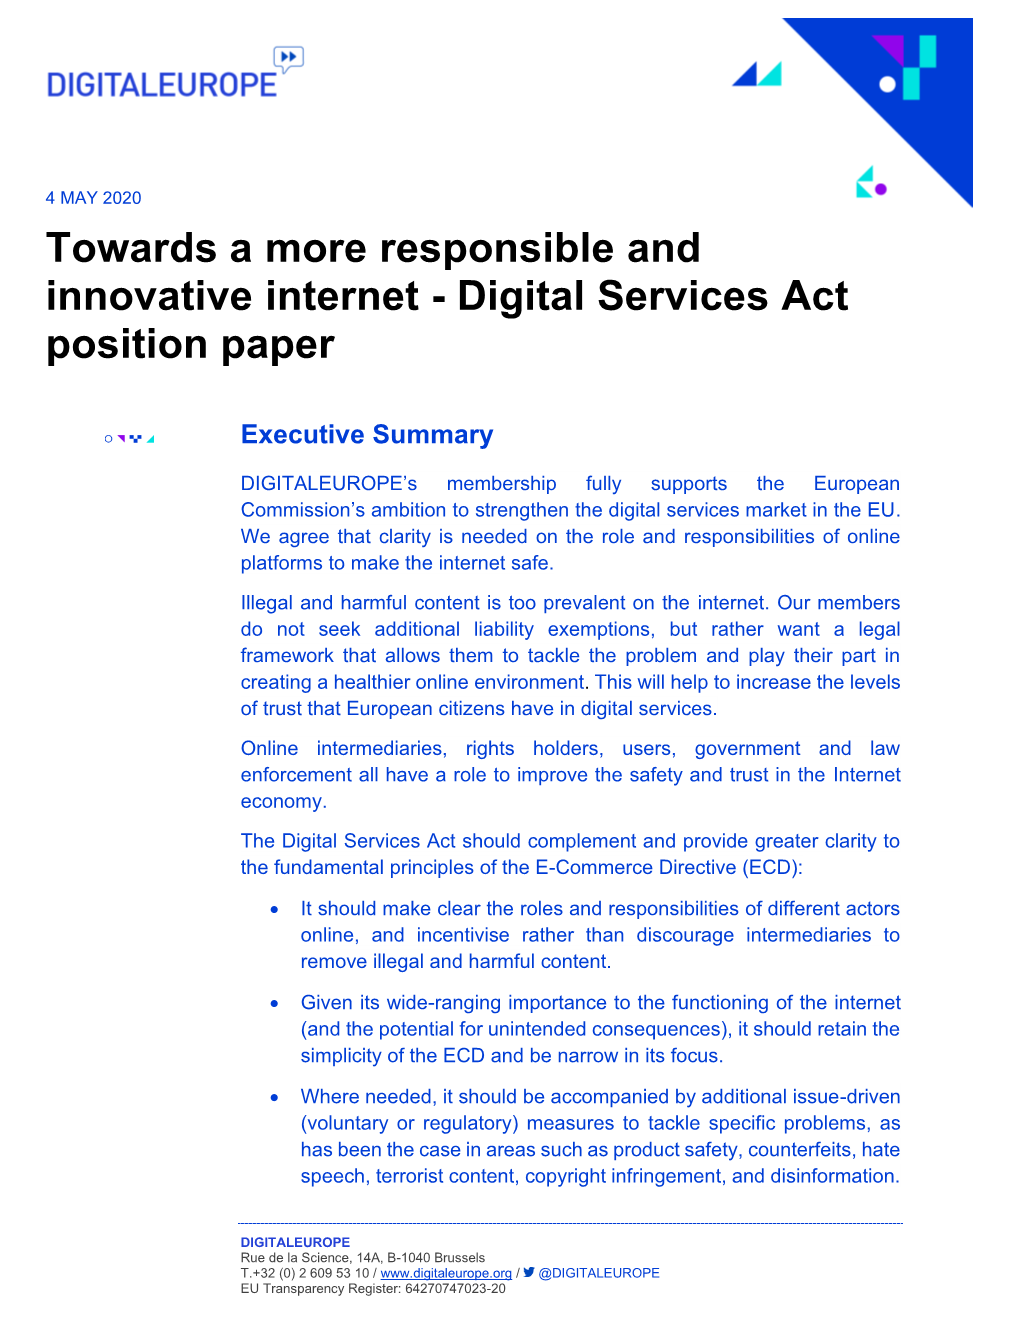 Towards a More Responsible and Innovative Internet - Digital Services Act Position Paper